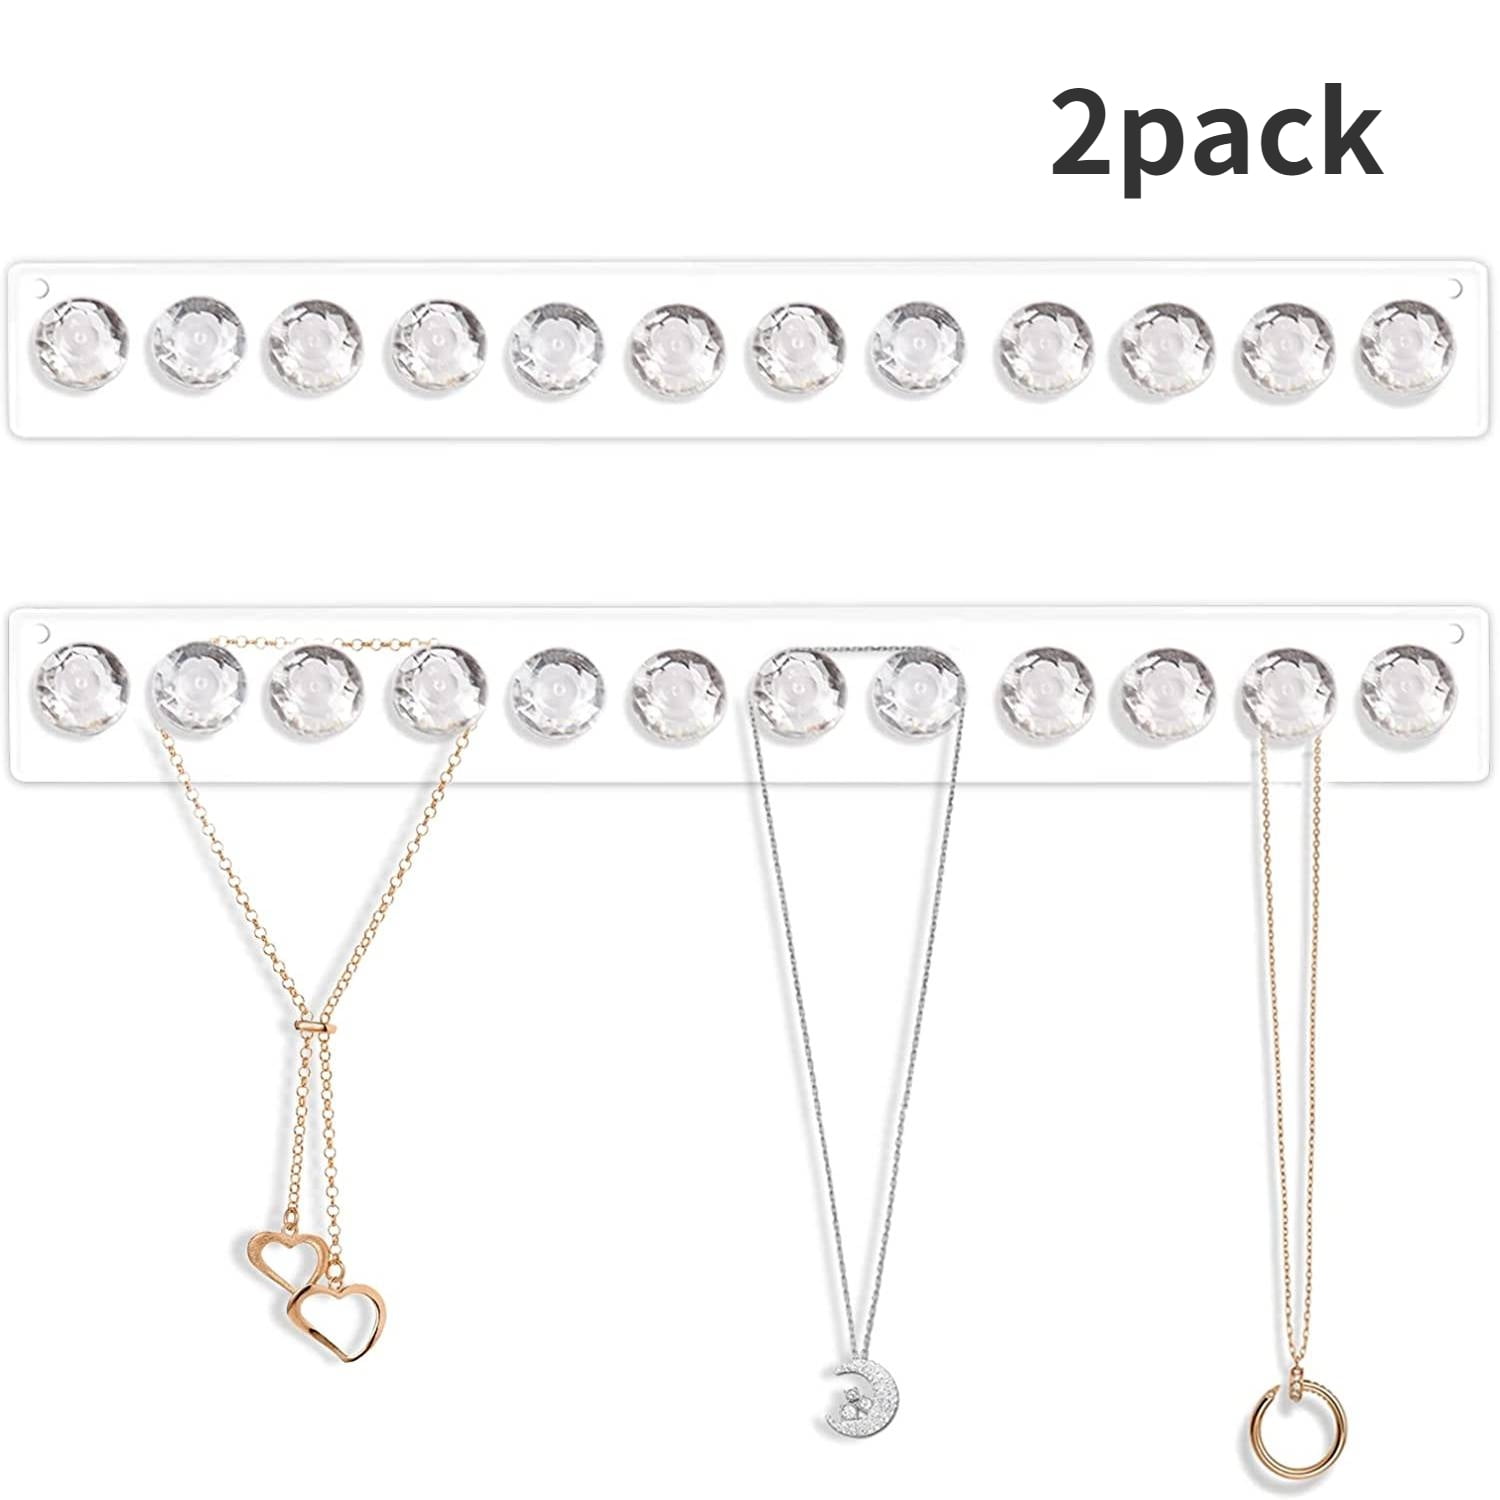 1pcs Acrylic Necklace Hanger, Pink Necklace Holder, Hanging Organizer,  Jewelry Hooks for Necklaces, Bracelets, Wall Mount - AliExpress